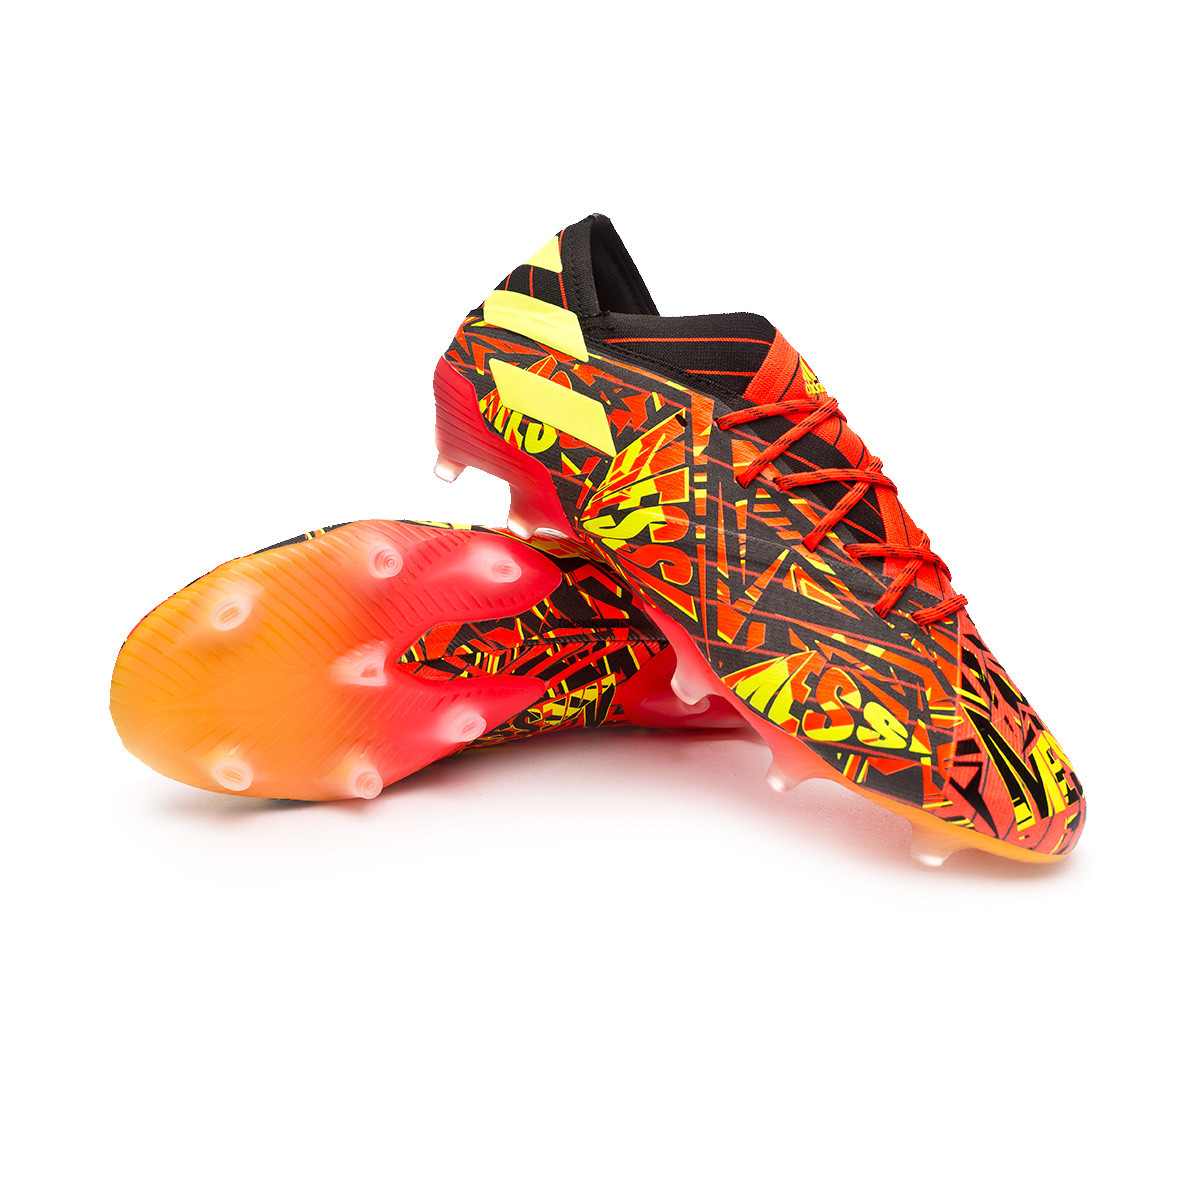 messi yellow boots